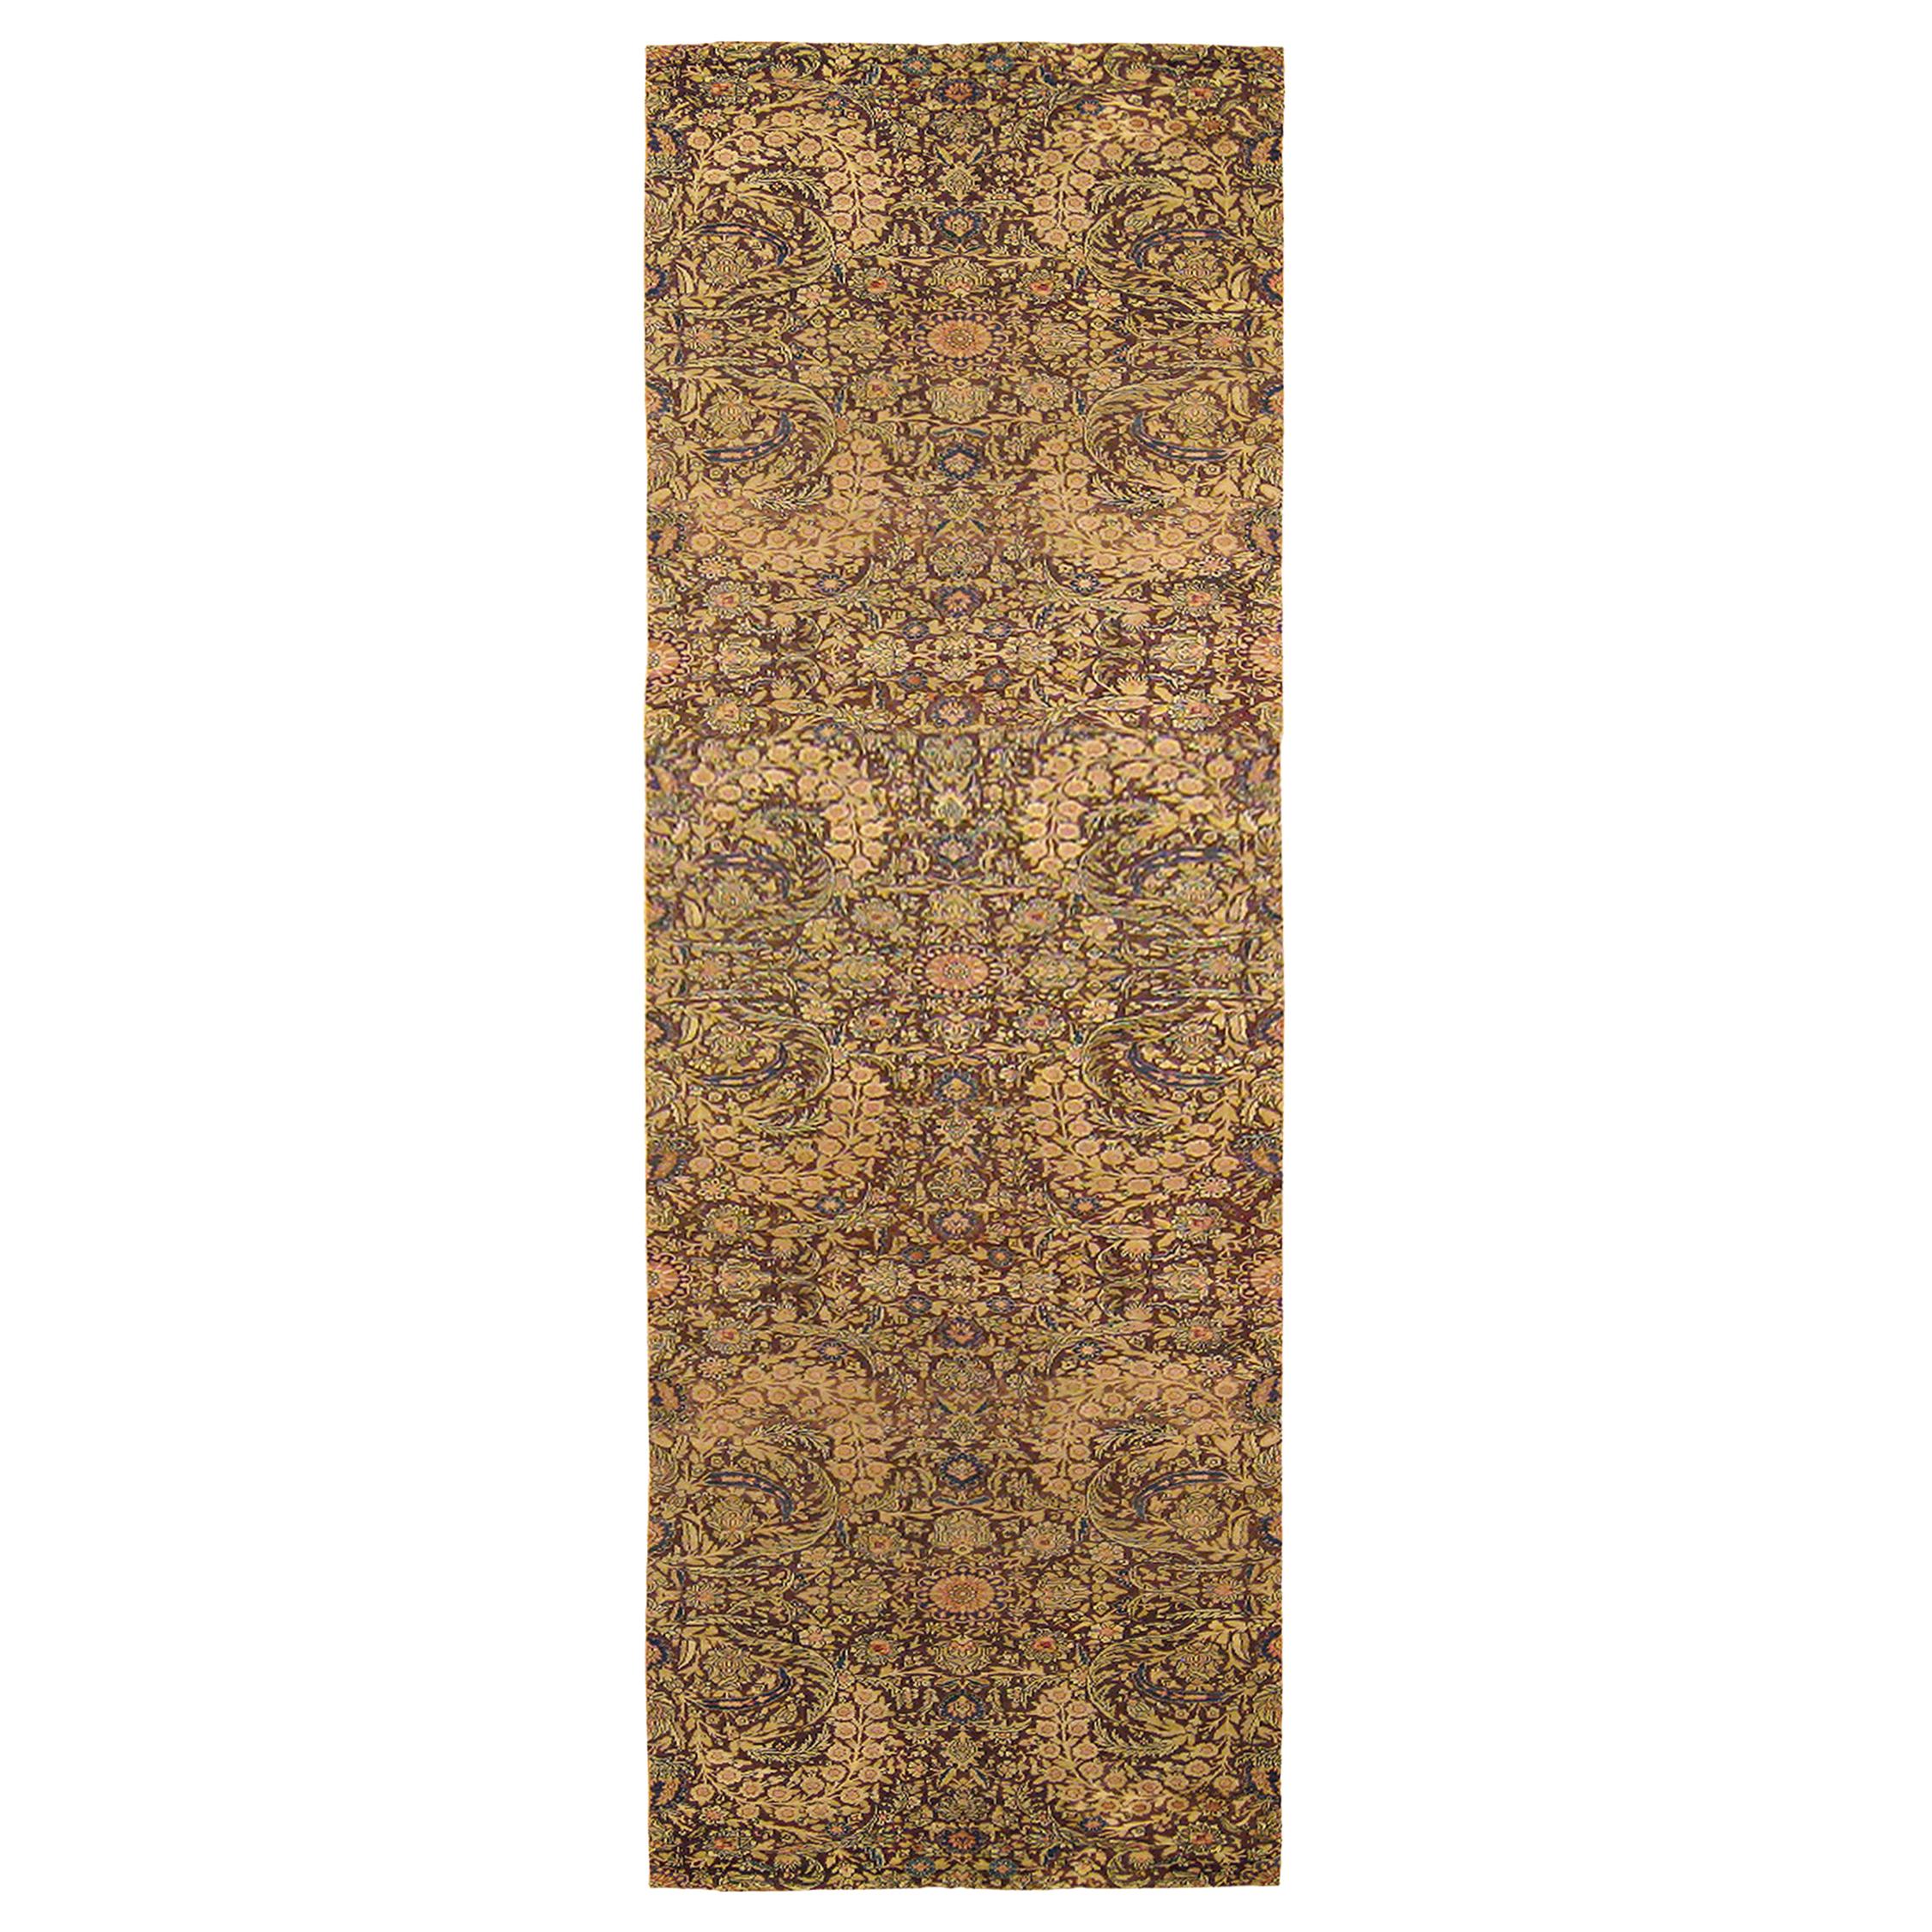 Antique Borderless Persian Lavar Oriental Rug, in Gallery size, Repeating Floral For Sale